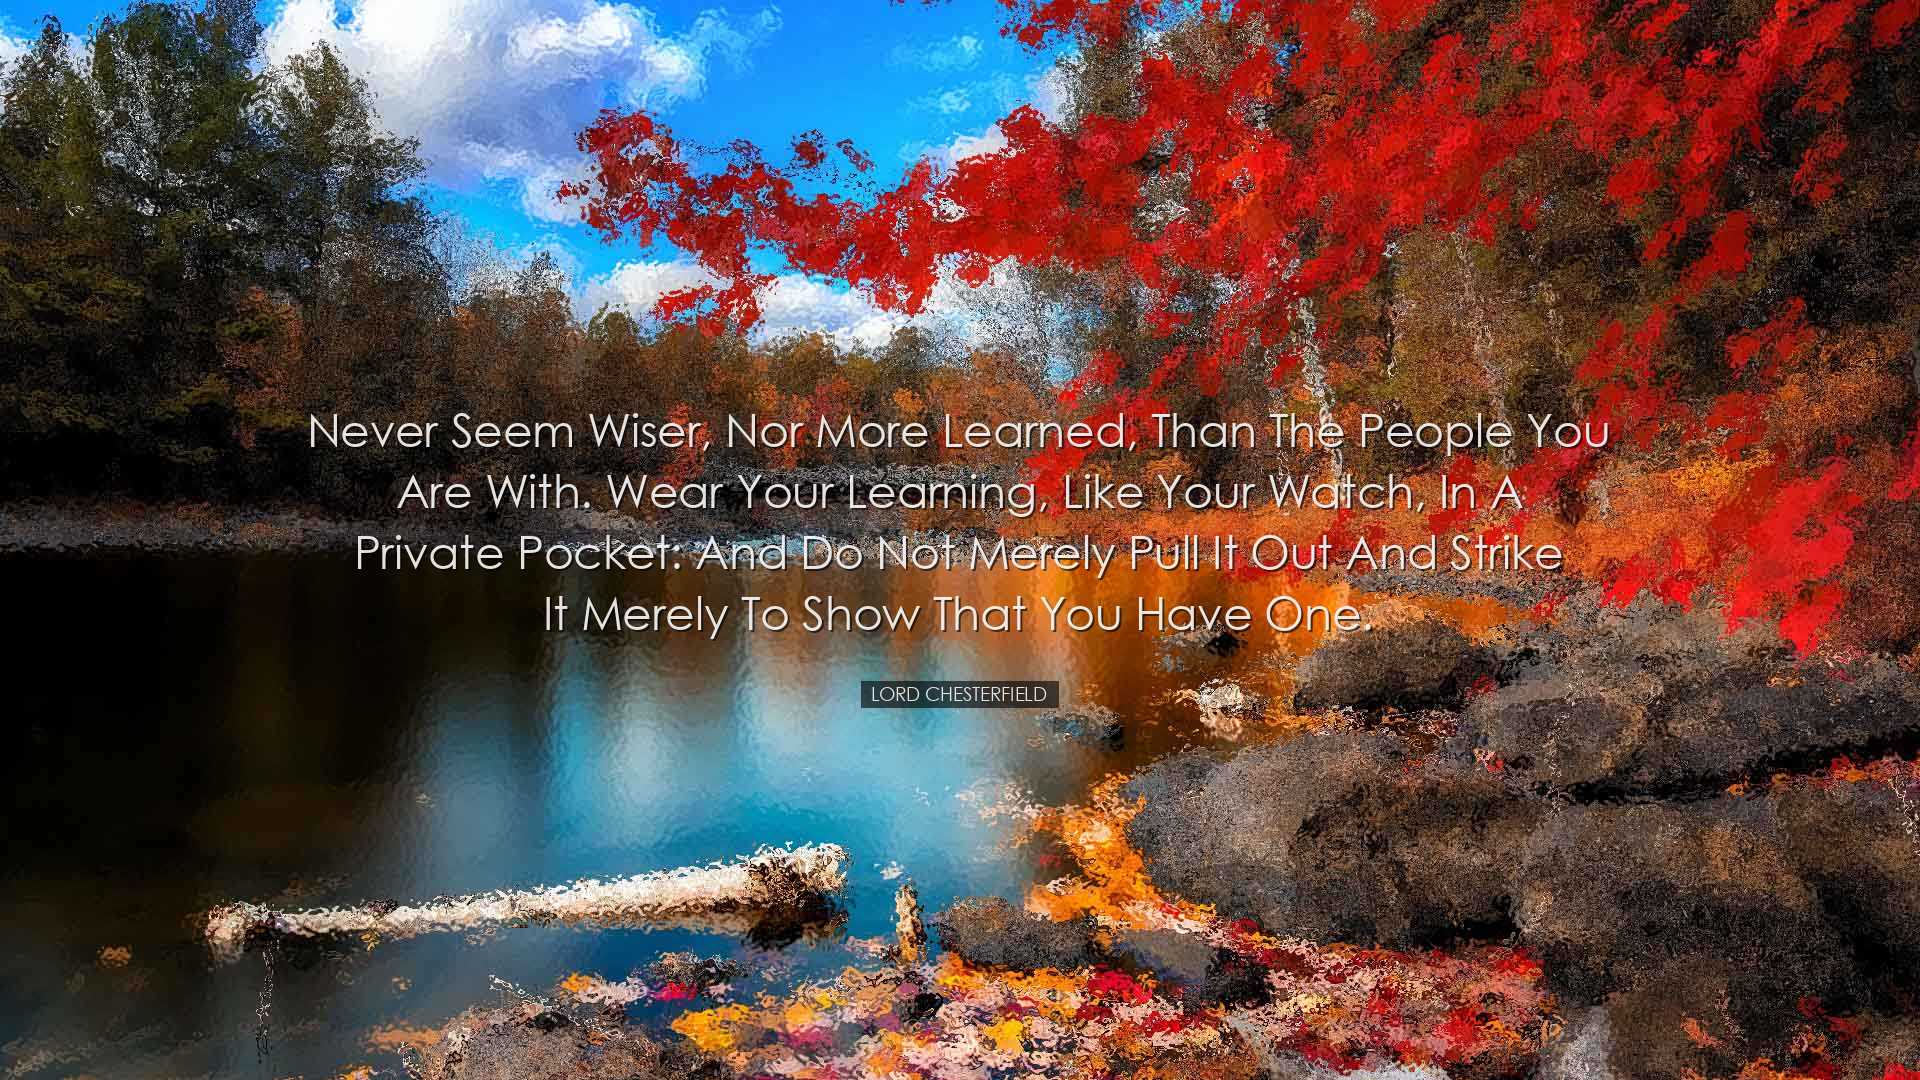 Never seem wiser, nor more learned, than the people you are with.